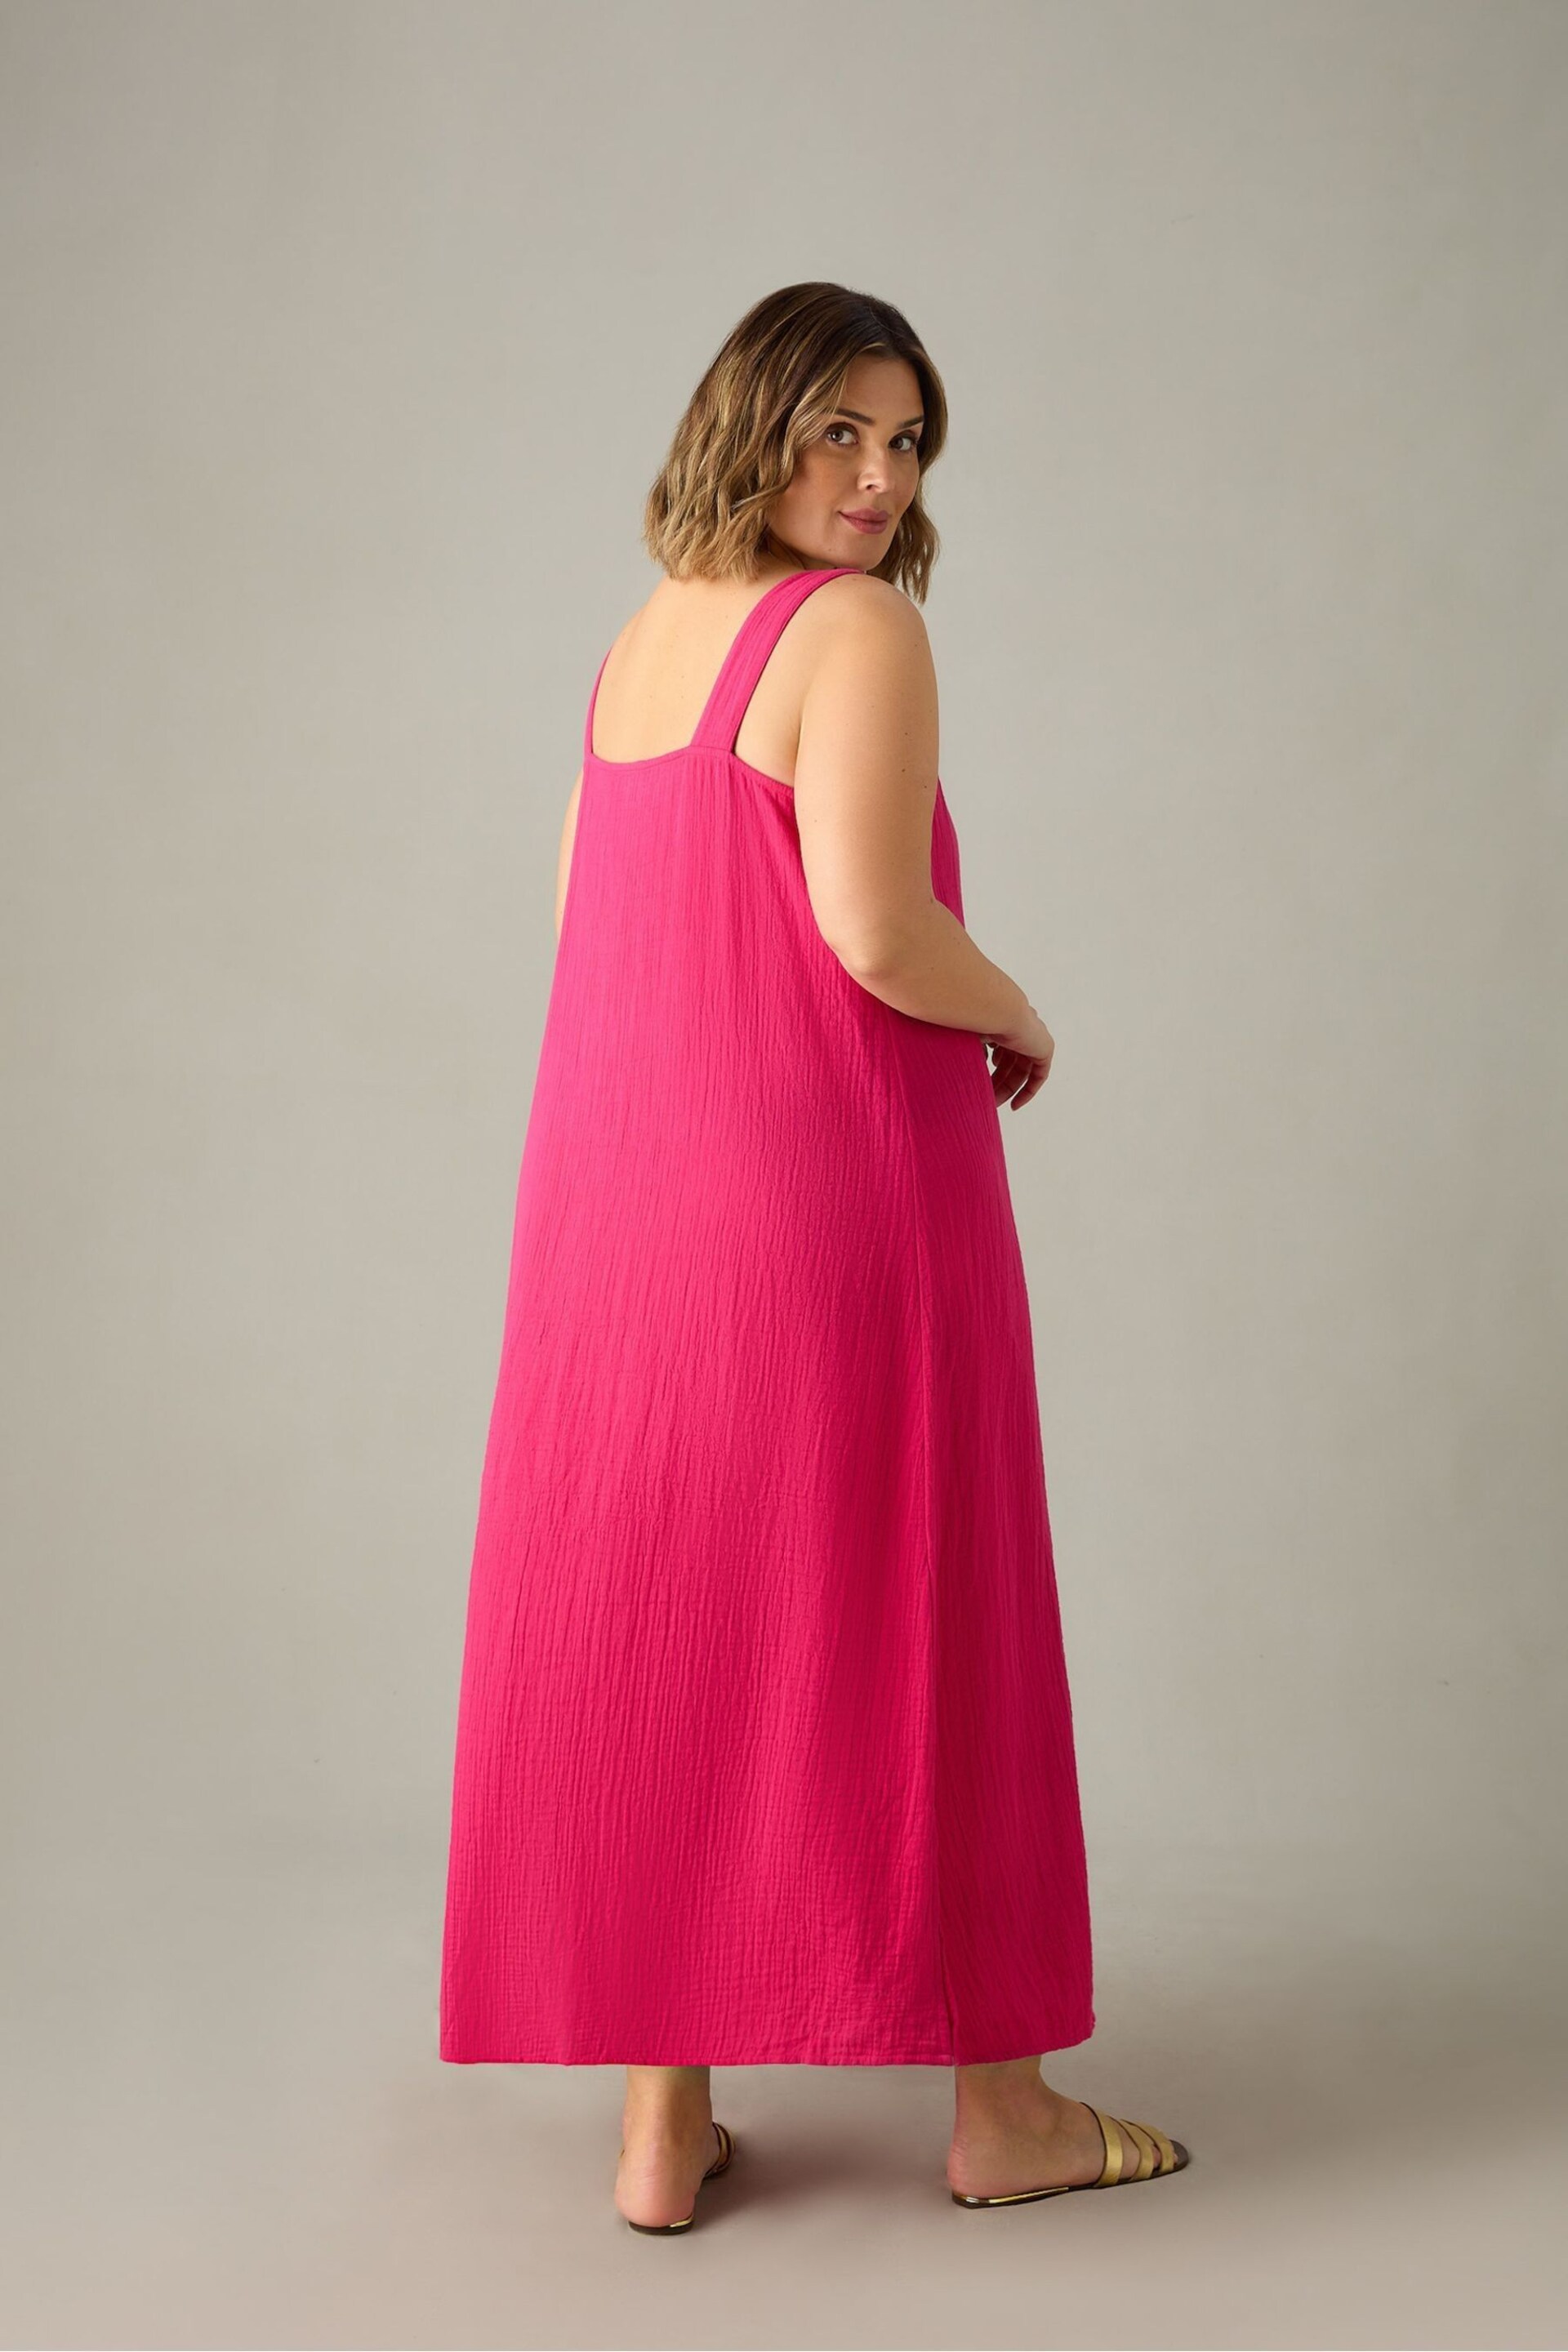 Live Unlimited Pink Cotton Crinkle Ring Dress - Image 5 of 8